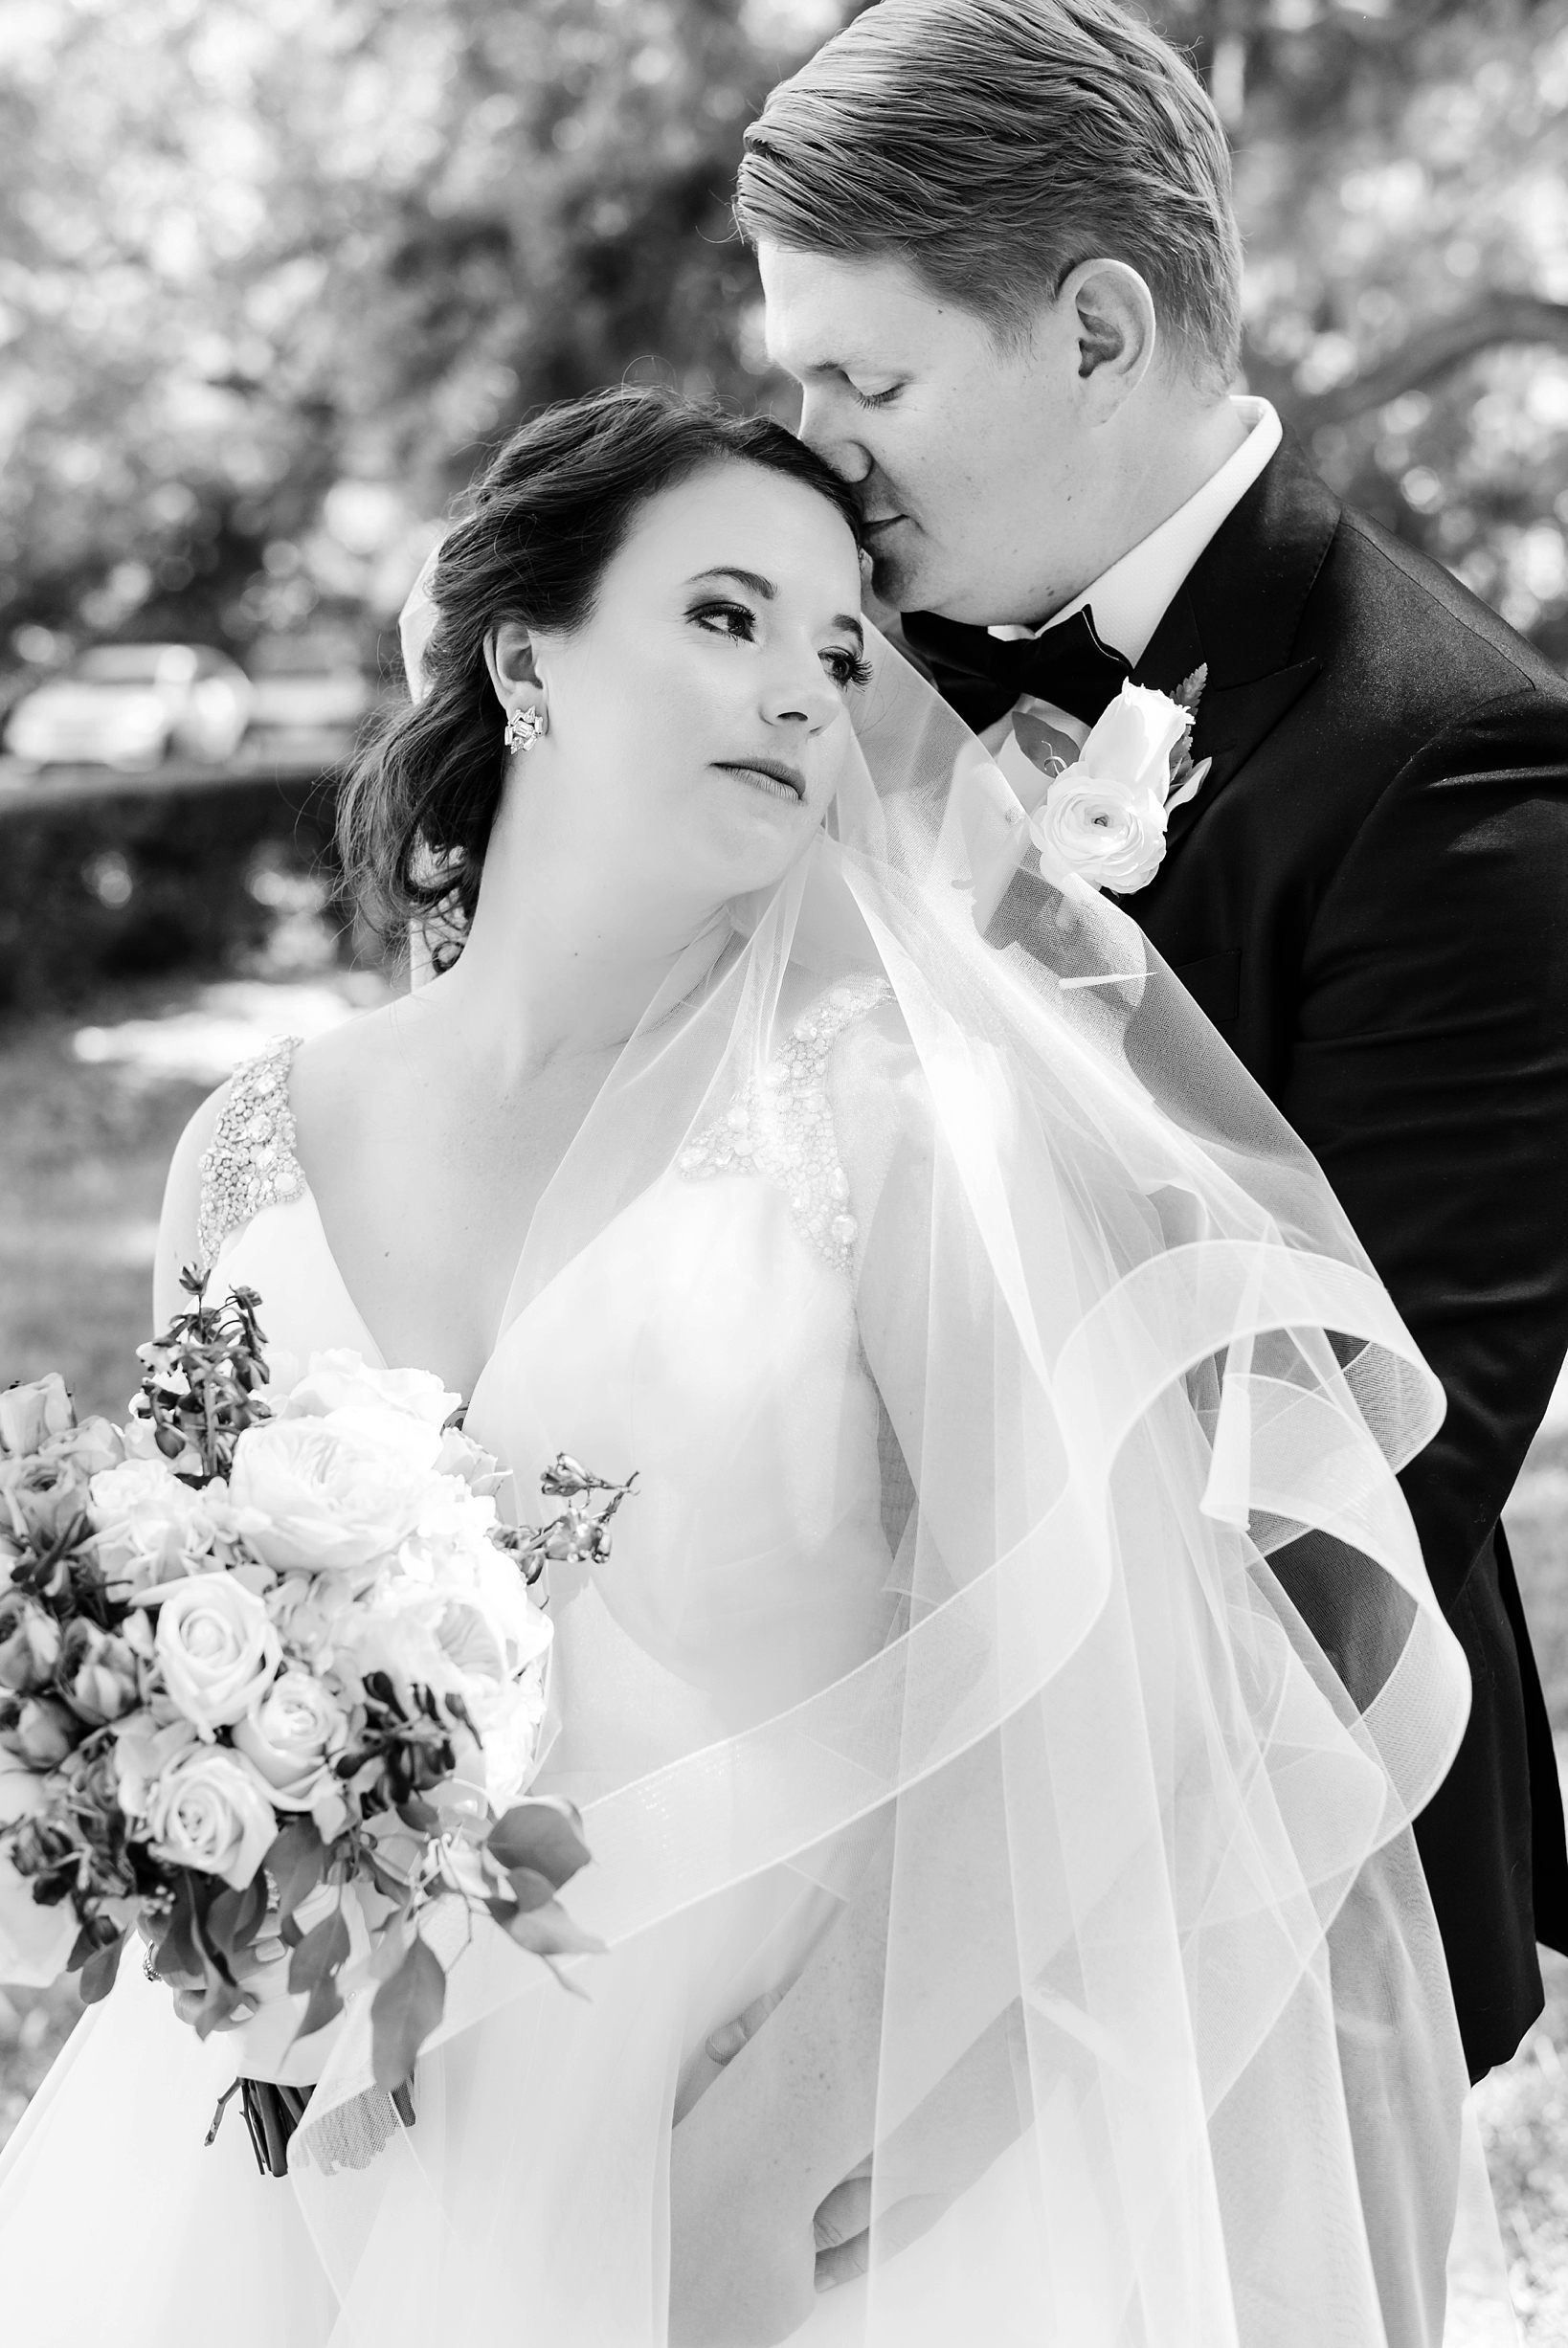 Classic image of the bride and groom in black and white